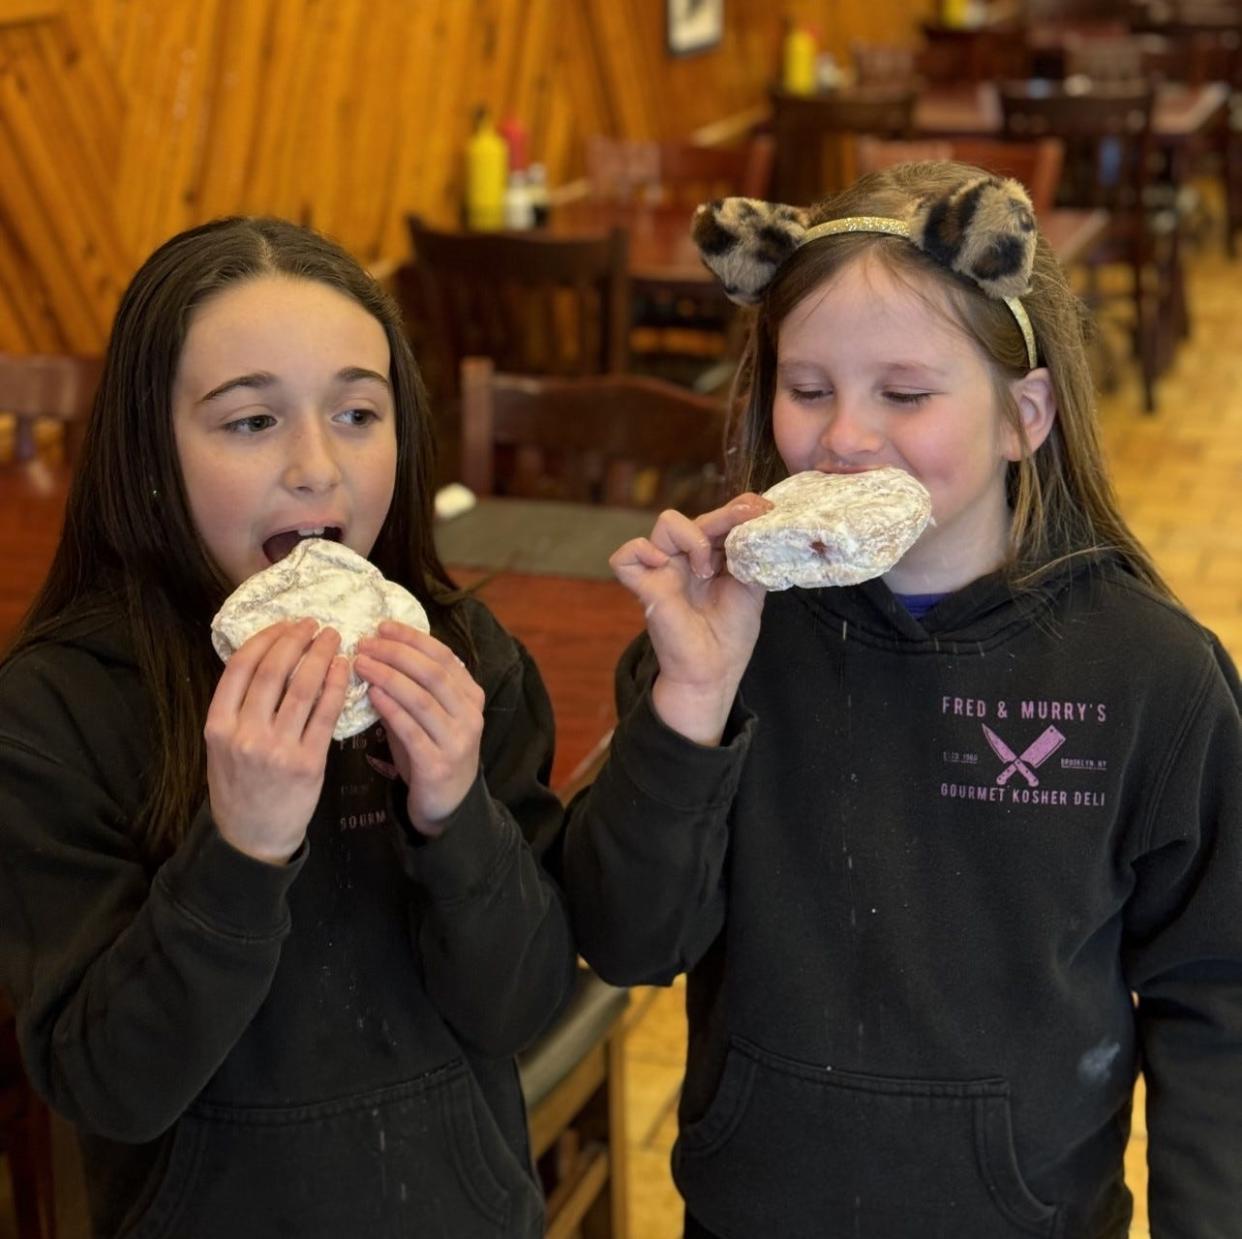 Addison Walther and Danielle Gerardo enjoying traditional sufganiyot for Hanukkah at Fred and Murry's Kosher Delicatessen in Freehold.